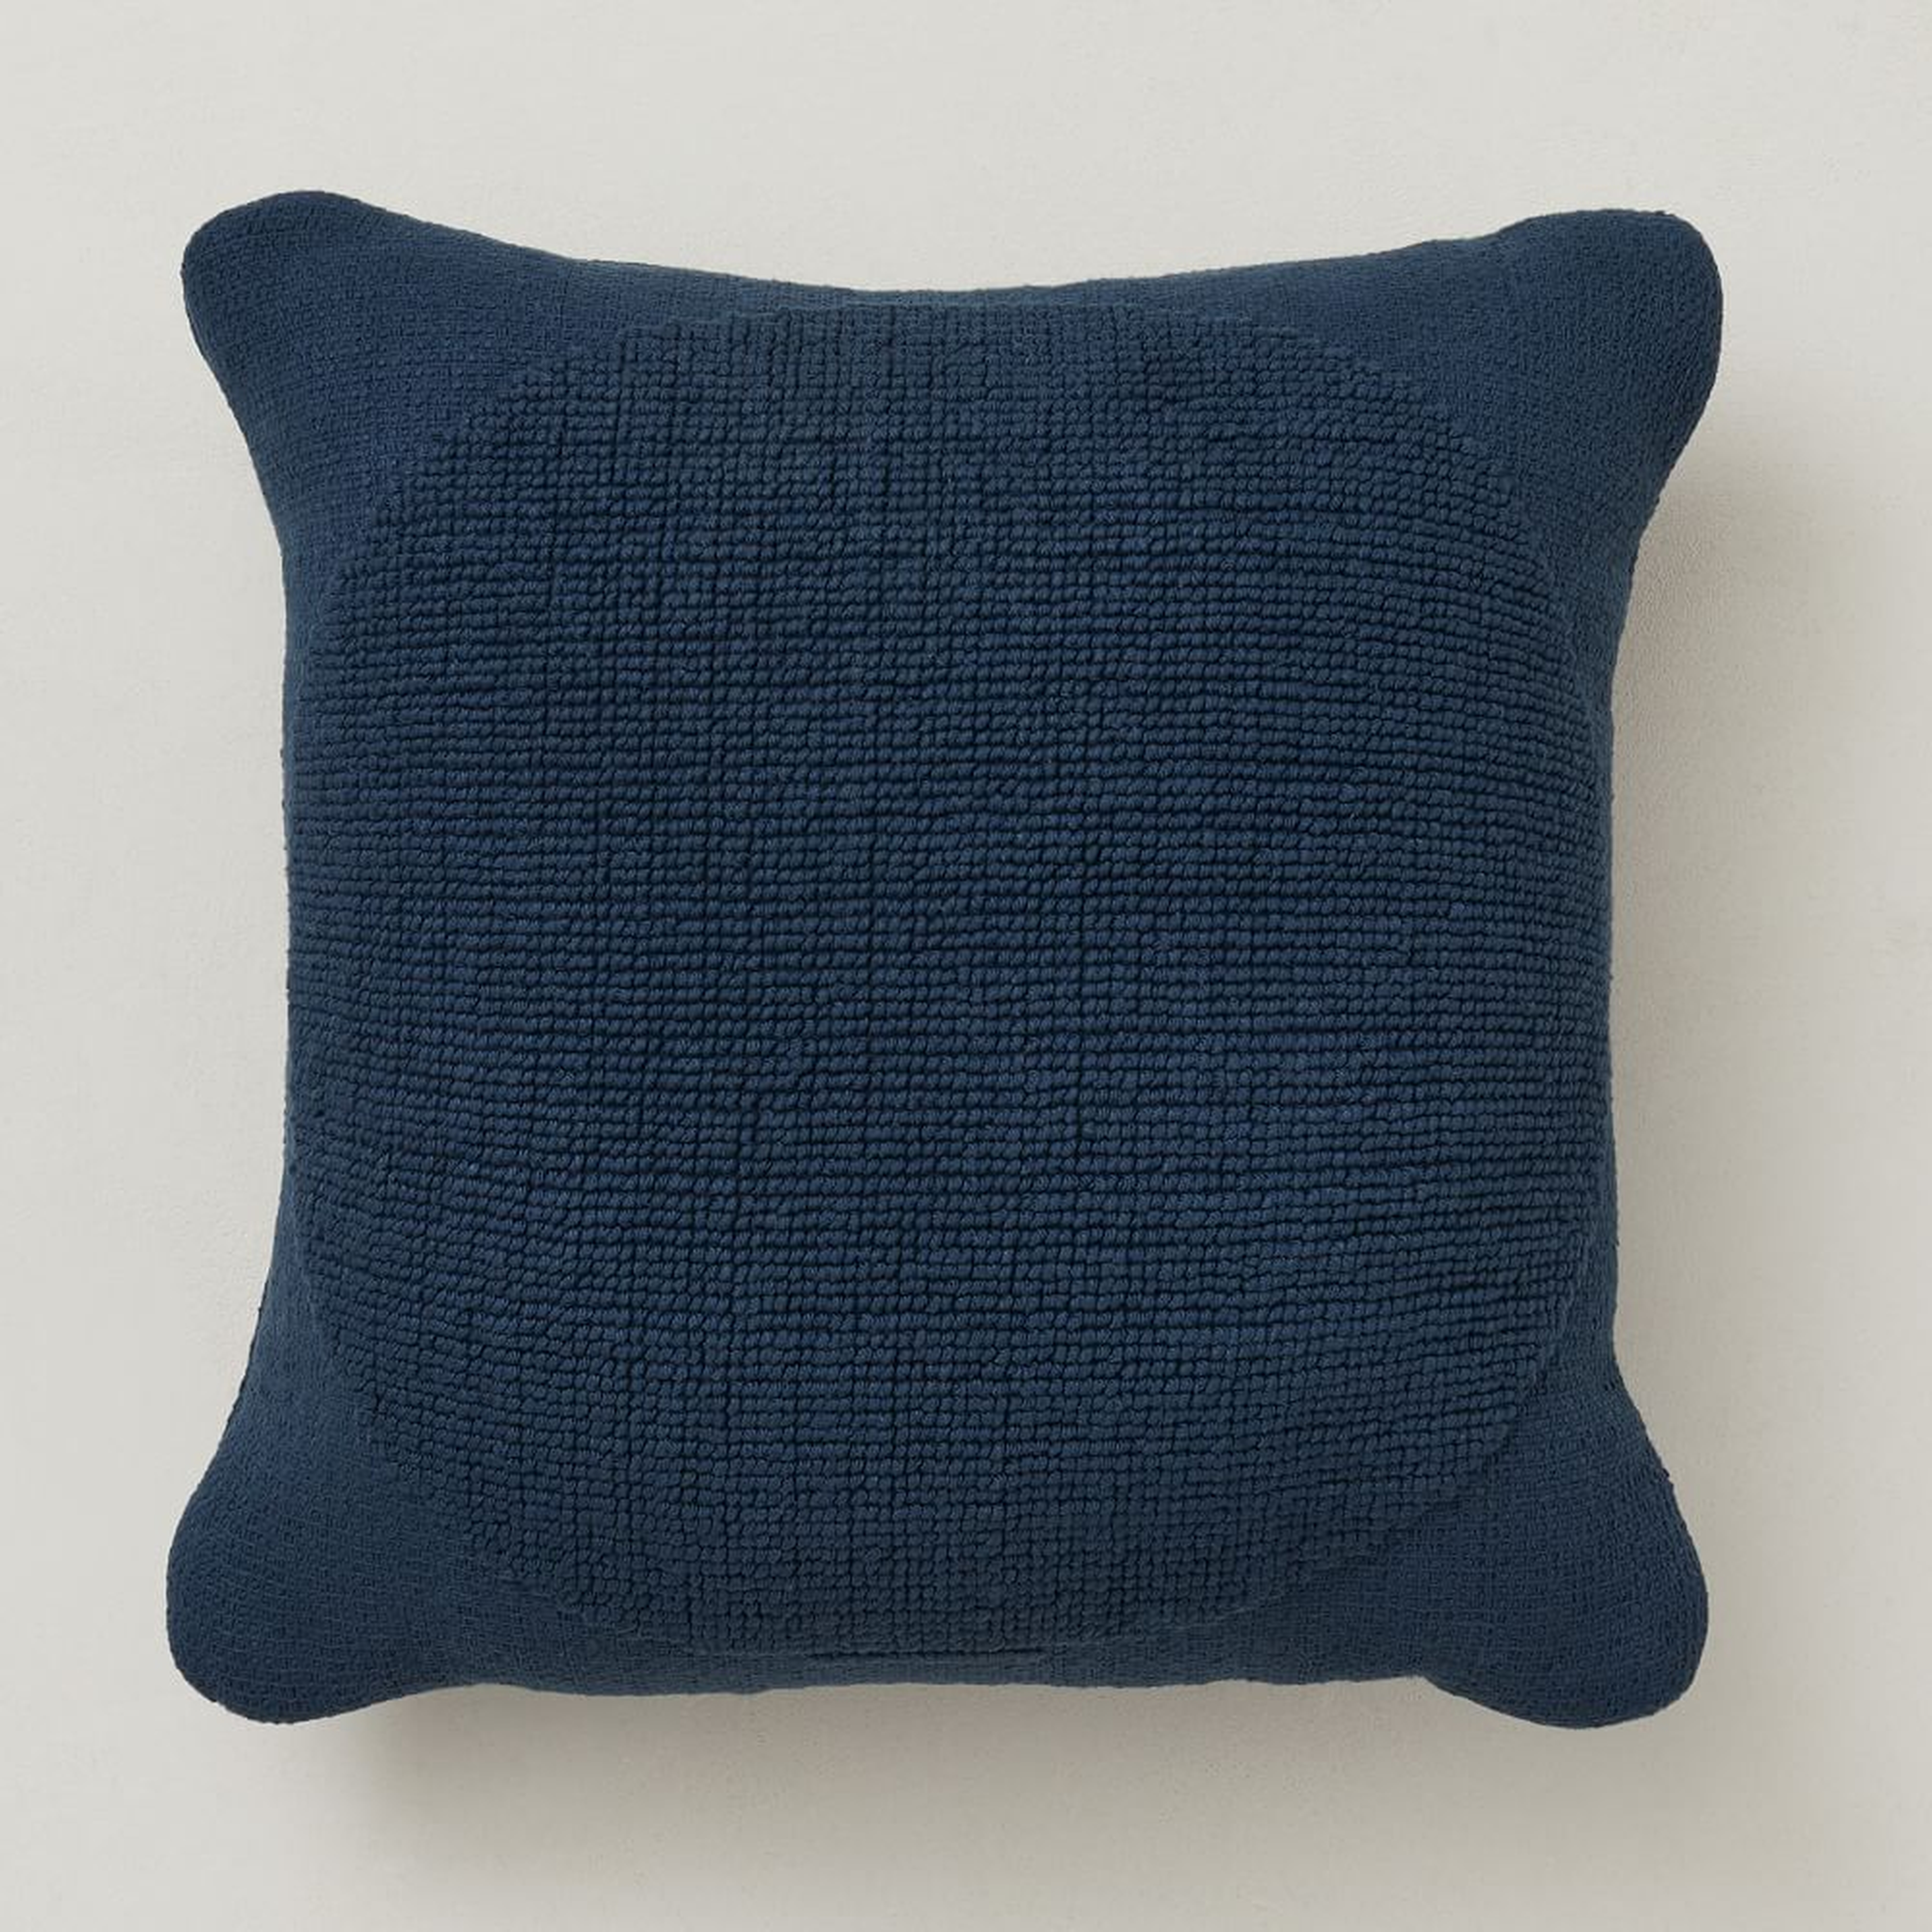 Outdoor Tufted Circle Pillow, 20"x20", Midnight - West Elm